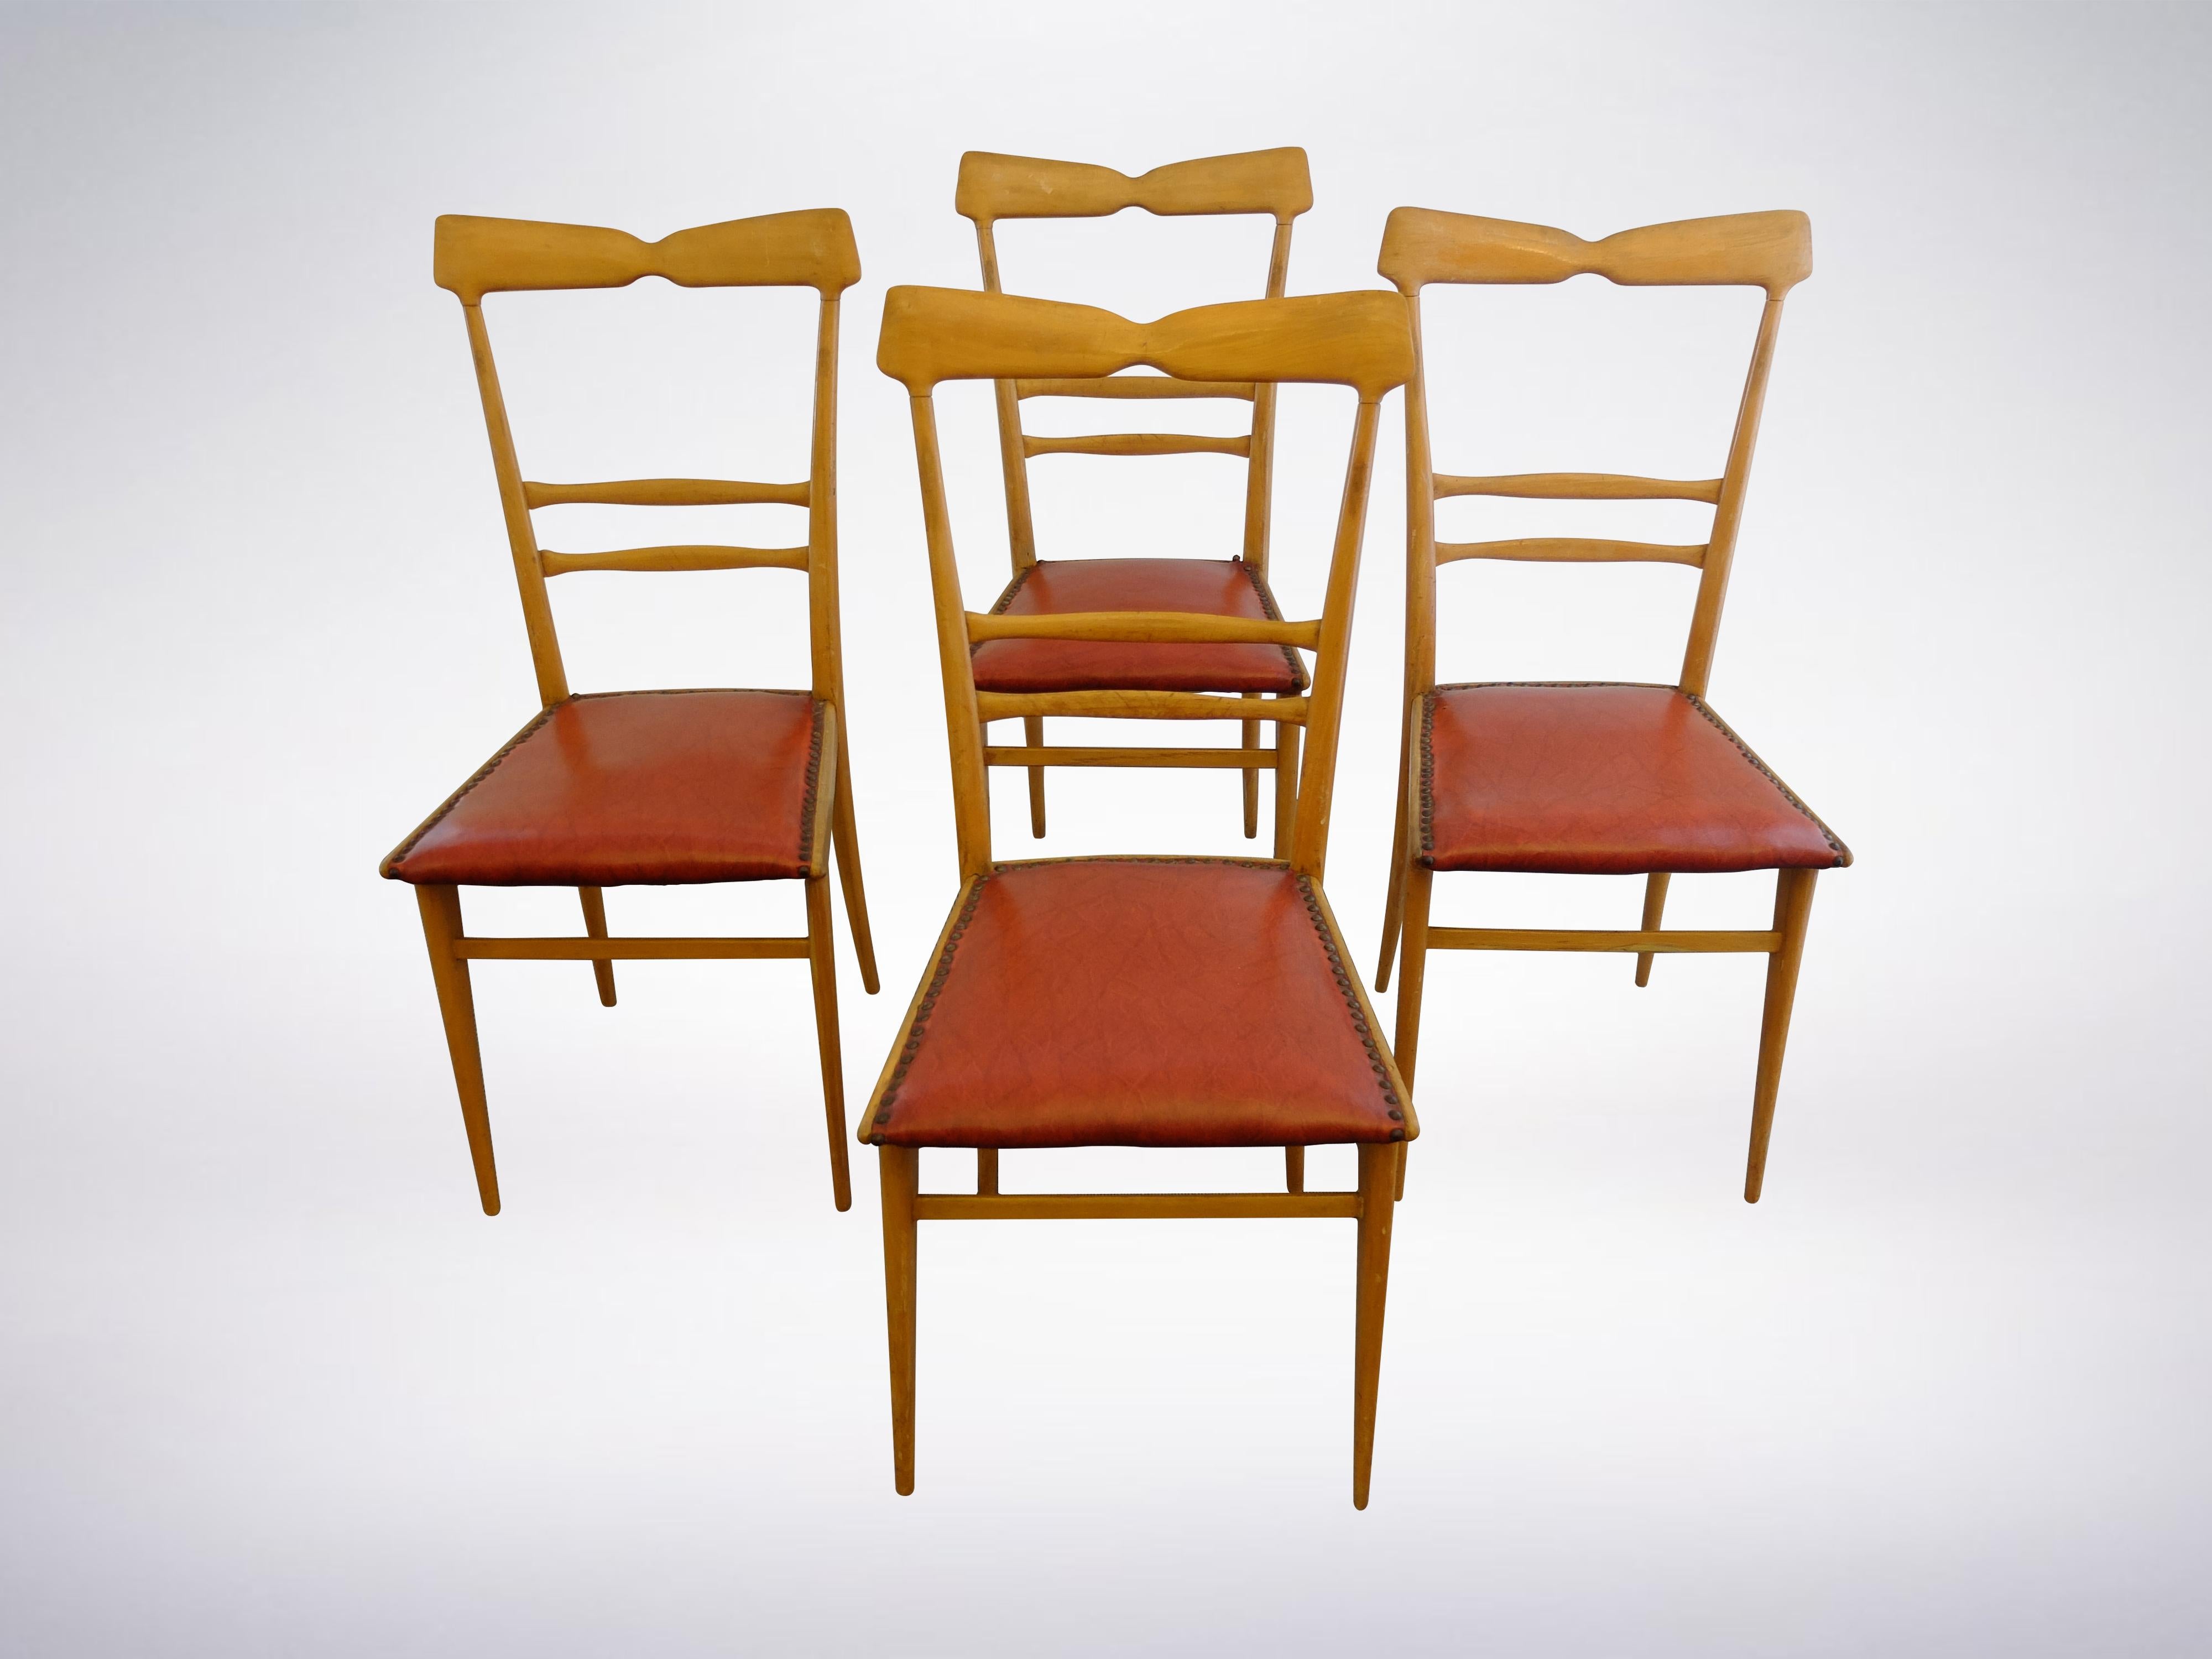 Ico Parisi and Luisa Parisi, Italian mid-century Set of 4 leather dining chairs, 1950
These dining chairs are a perfect set displaying style and sturdiness. 


Please note : the 